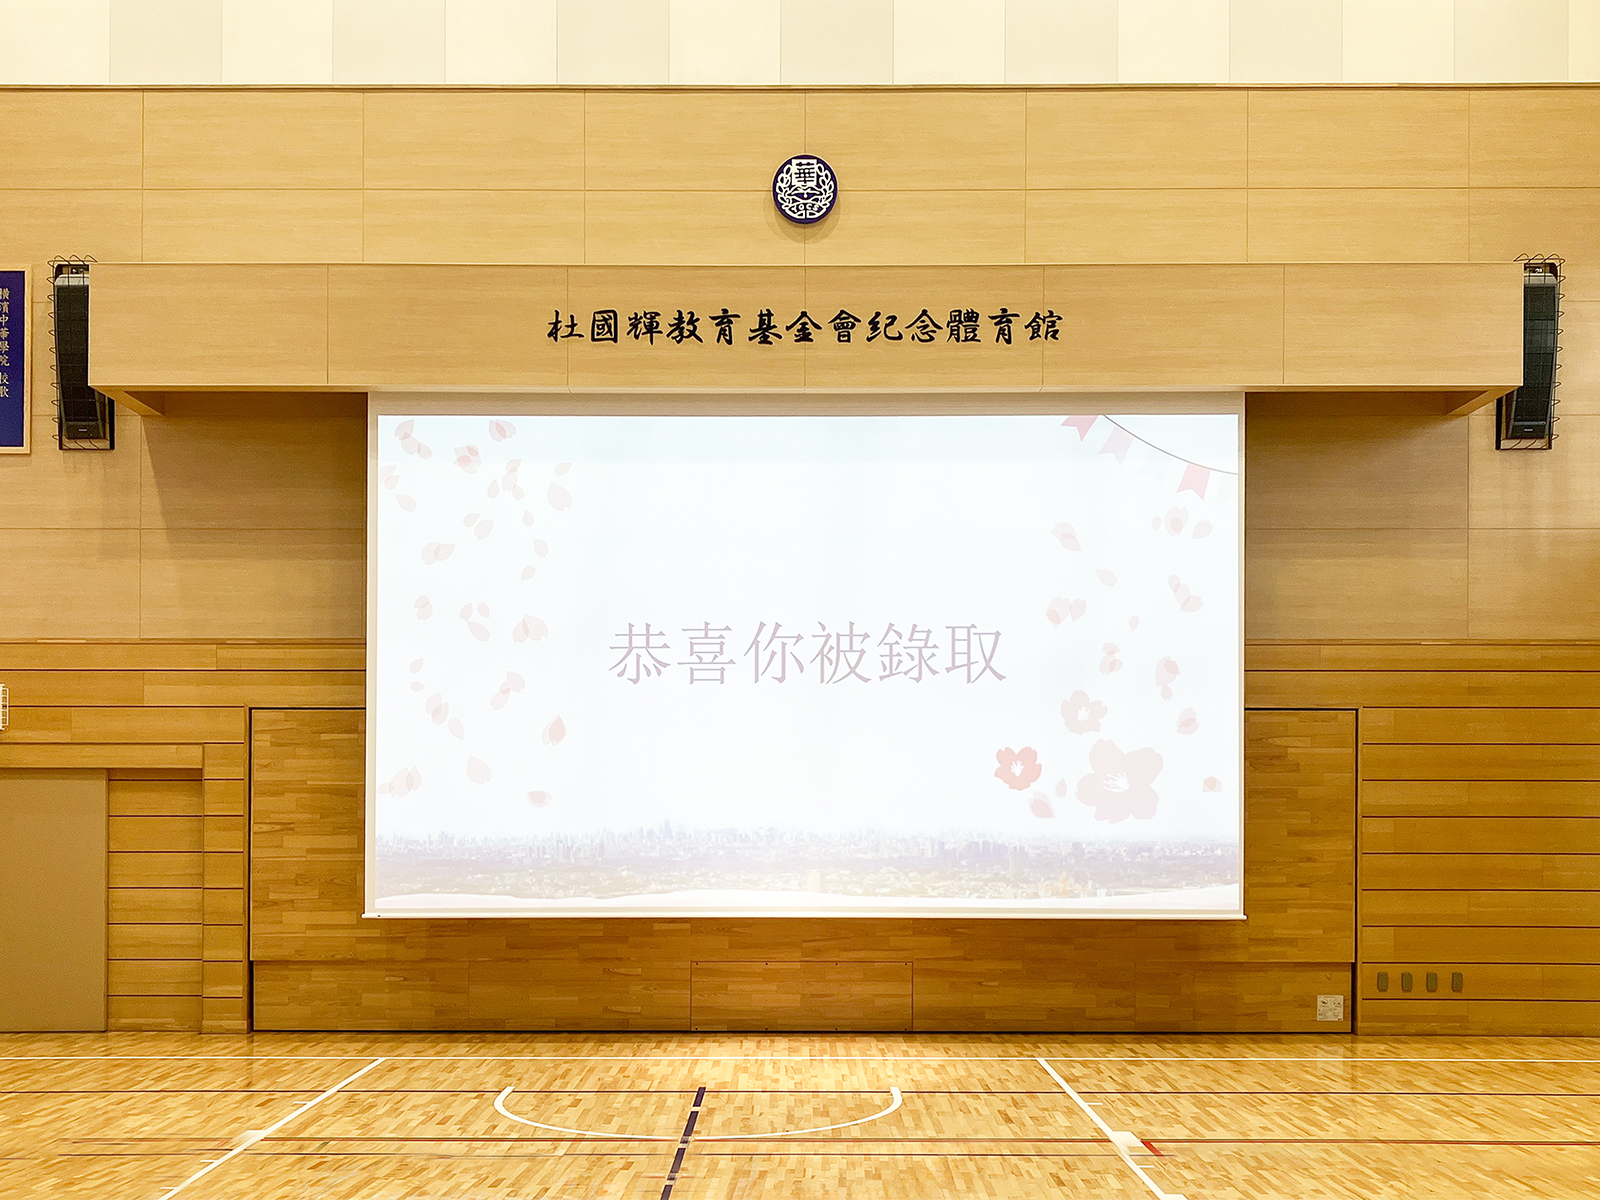 [Discover OS] Large size screen delivery example to the school gym | Yokohama Chinese Academy’s split delivery example for customer’s satisfaction